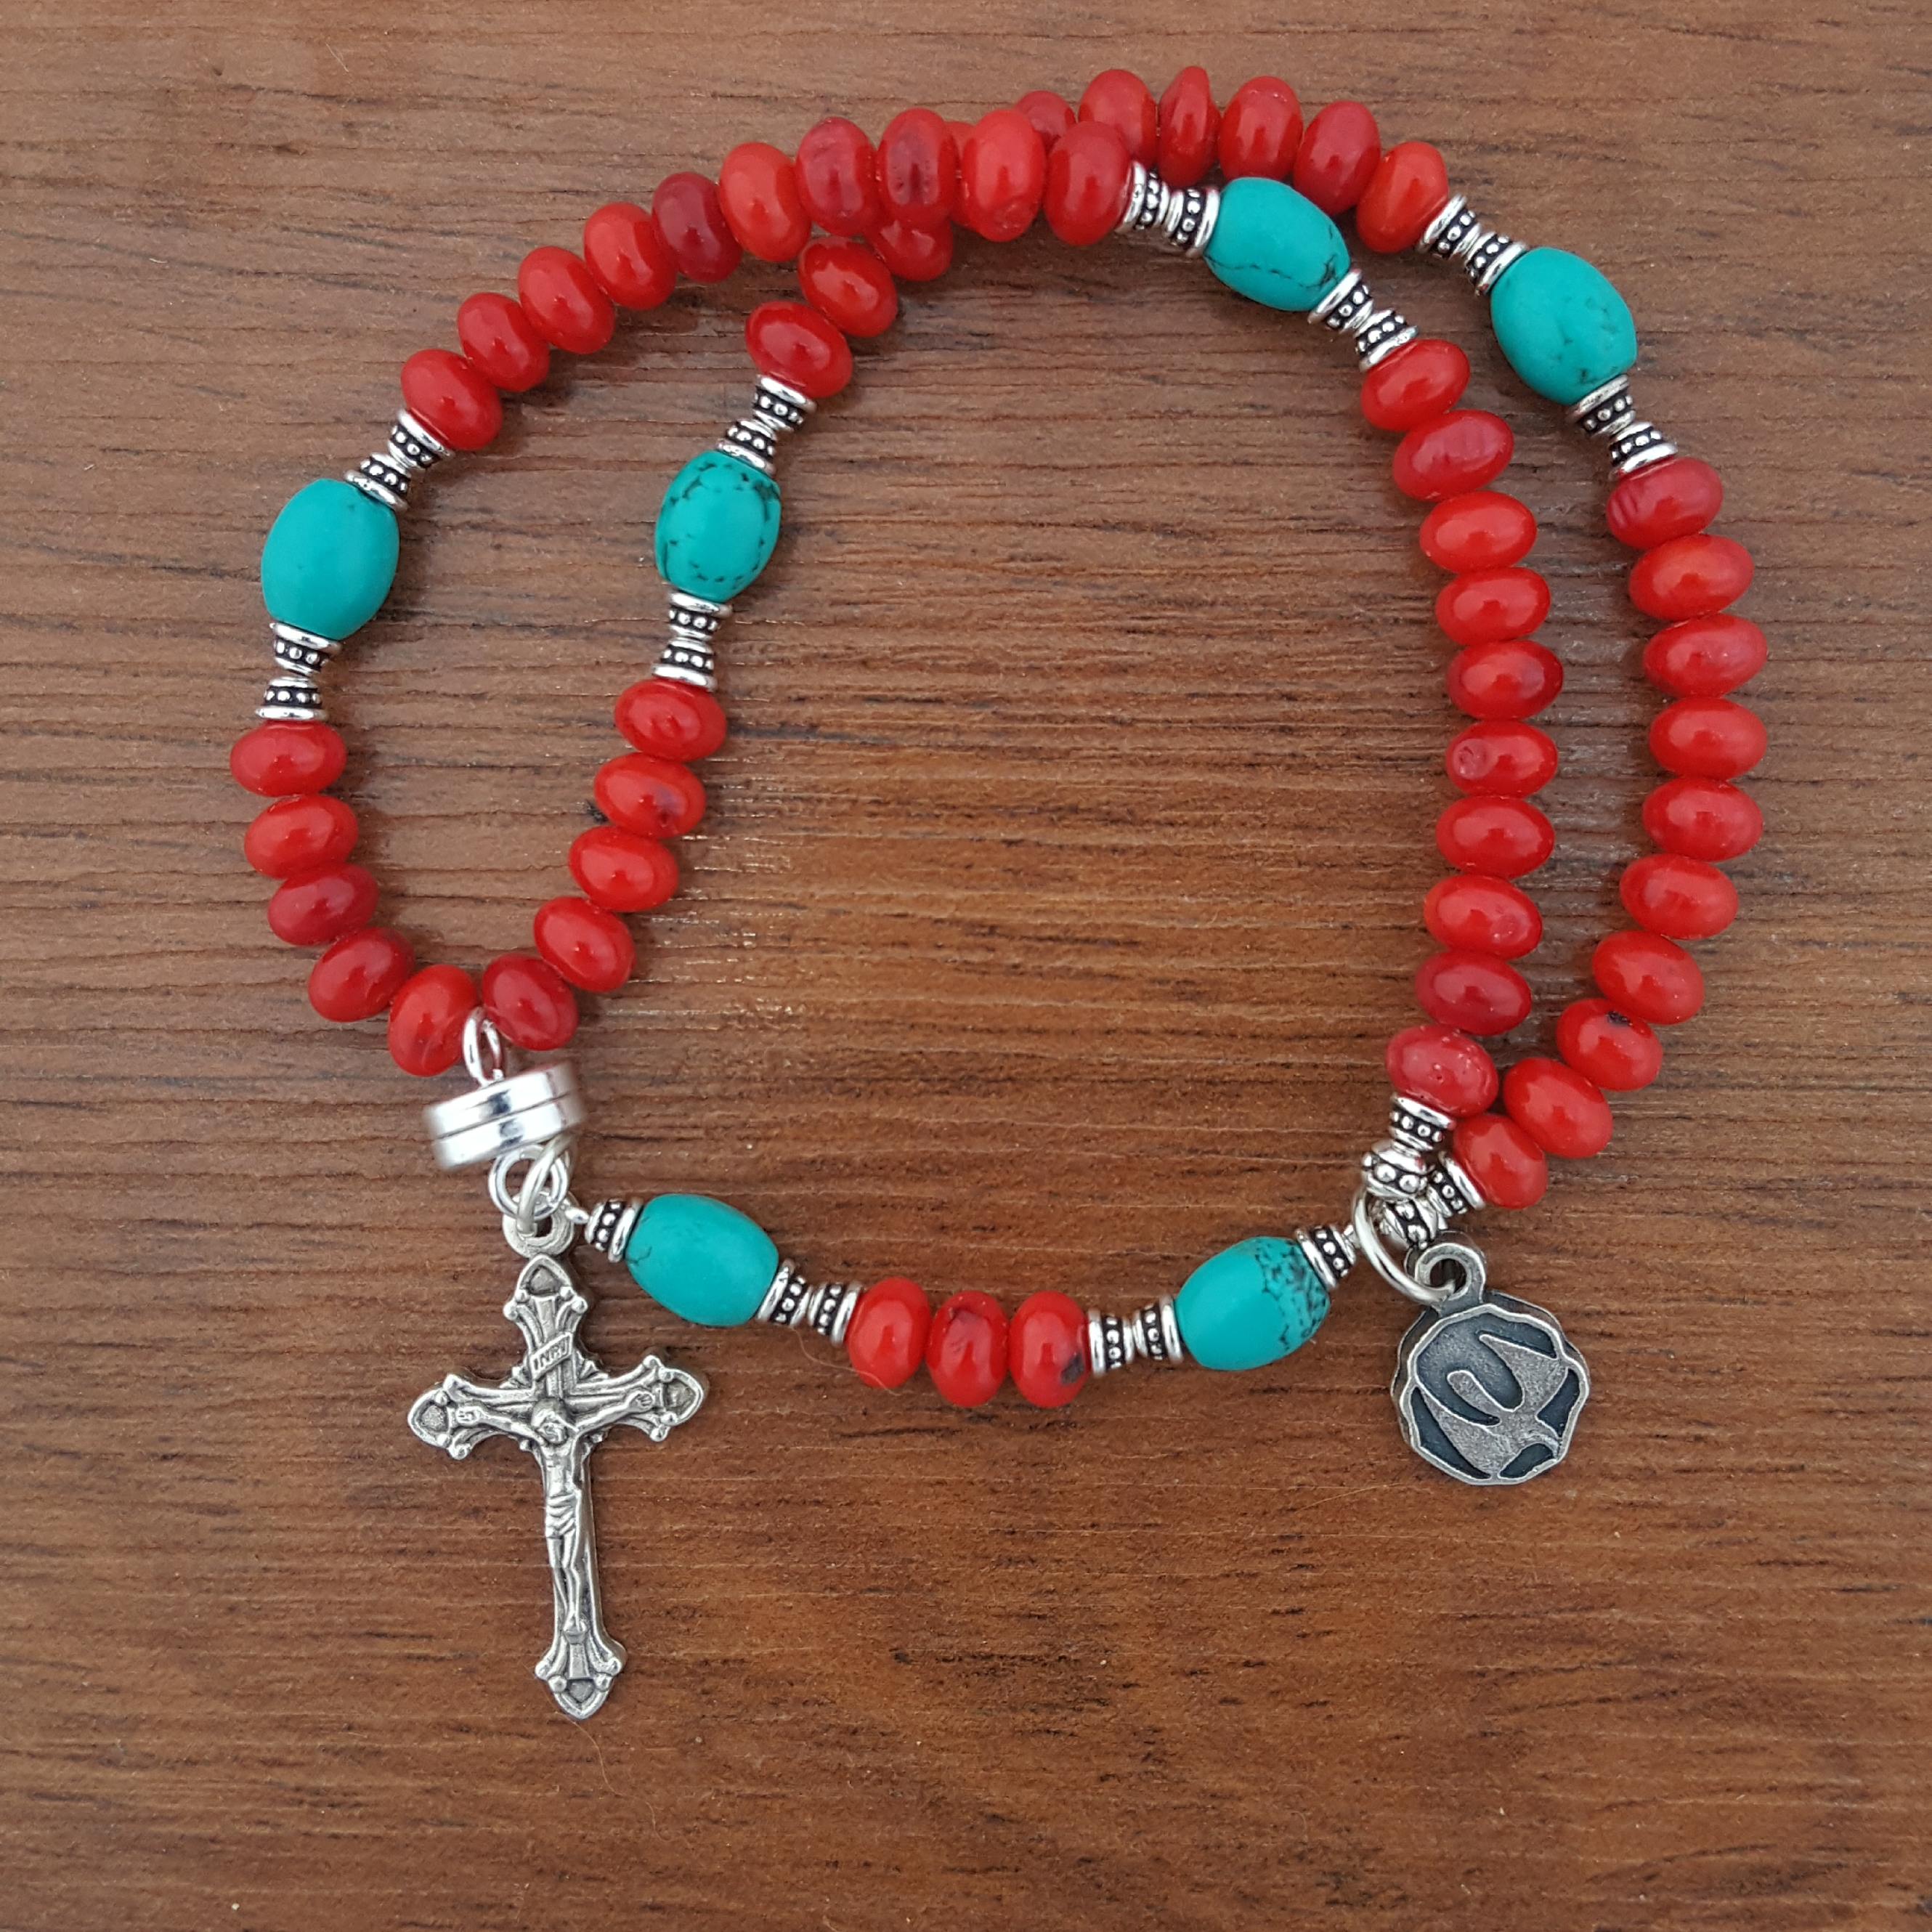 Genuine Coral and Turquoise Wrist Rosary